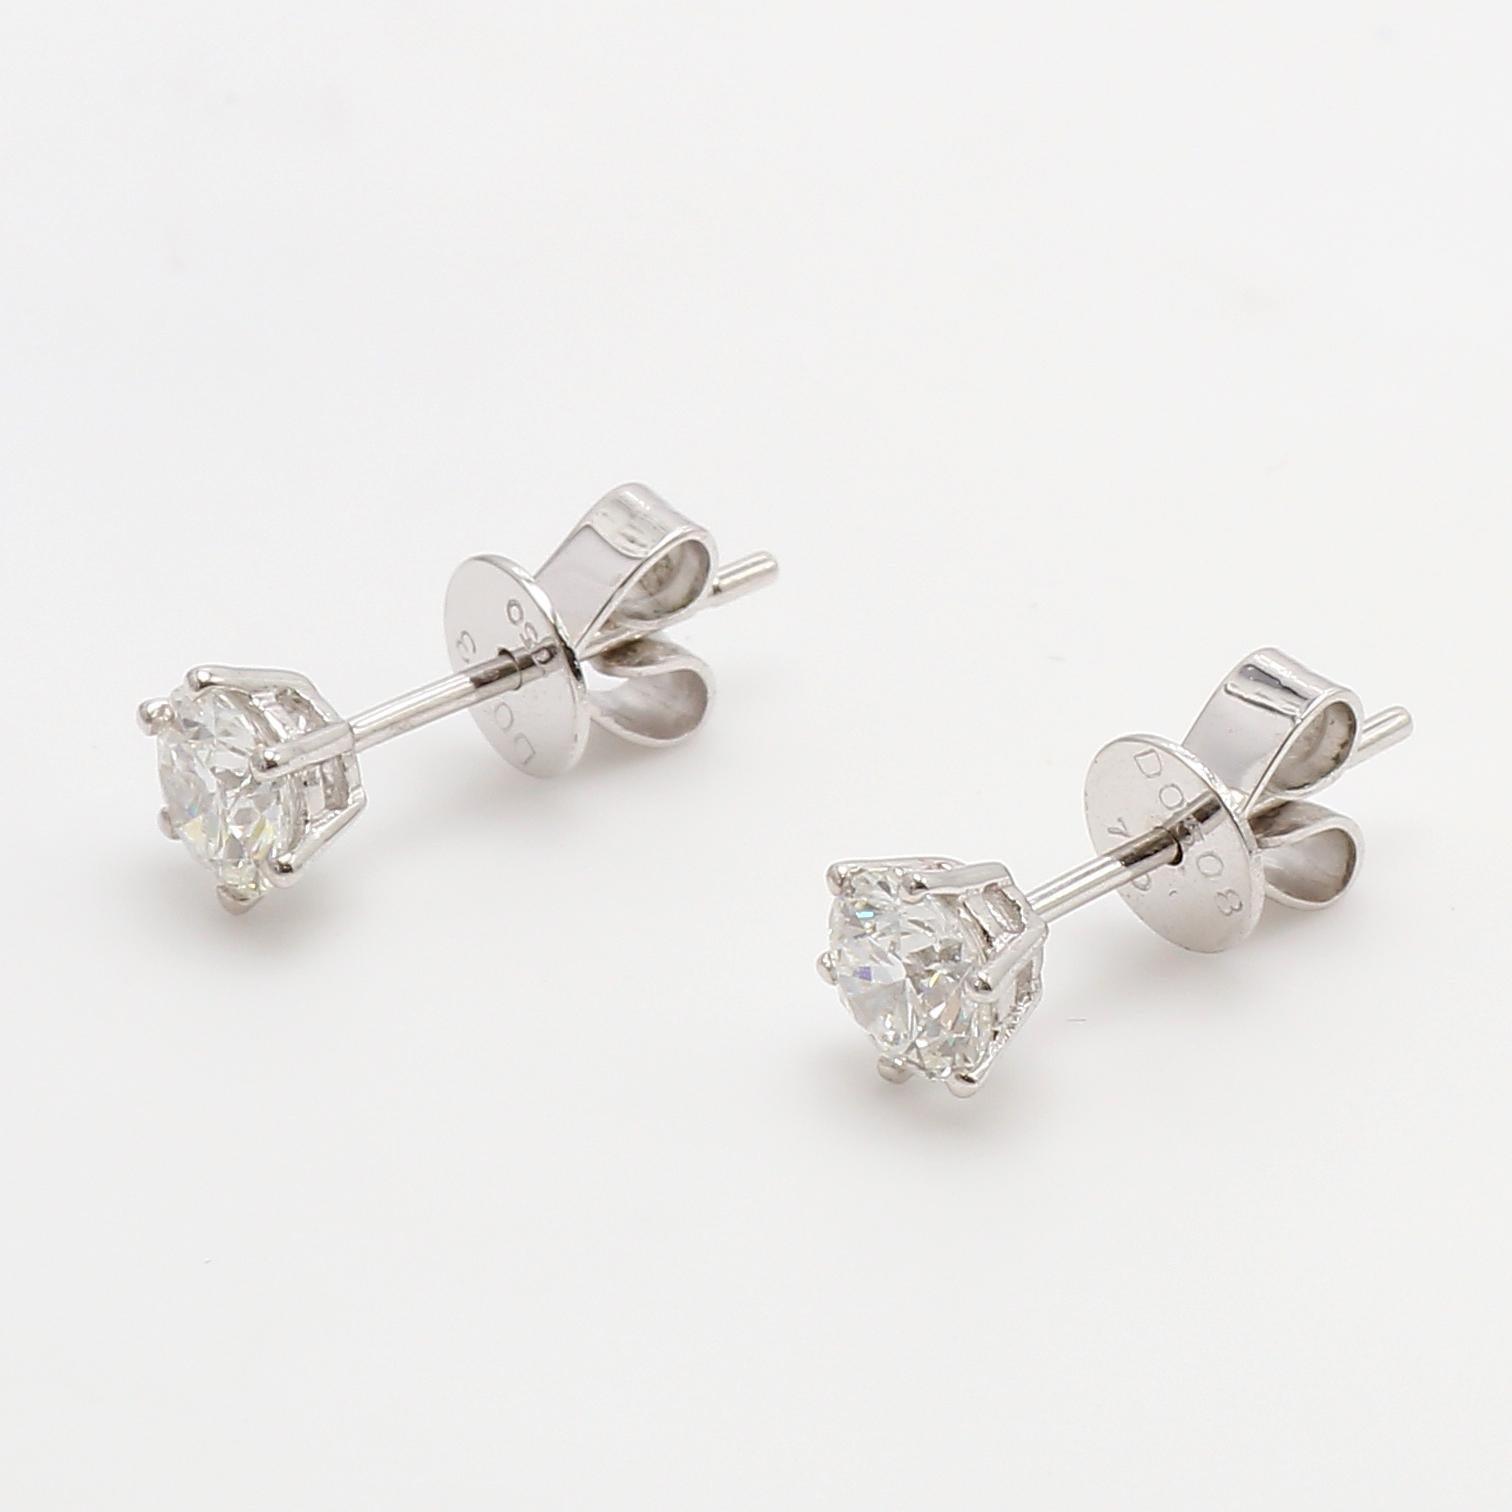 Classic Diamond Stud Earrings, set in 18K White Gold.
Round Brilliant Cut White Diamonds totaling 1.038ct G Color, VS2 Clarity
6 ProngSolitaire Studs. Designer Earrings. Beutifull Shimansky South African Diamonds